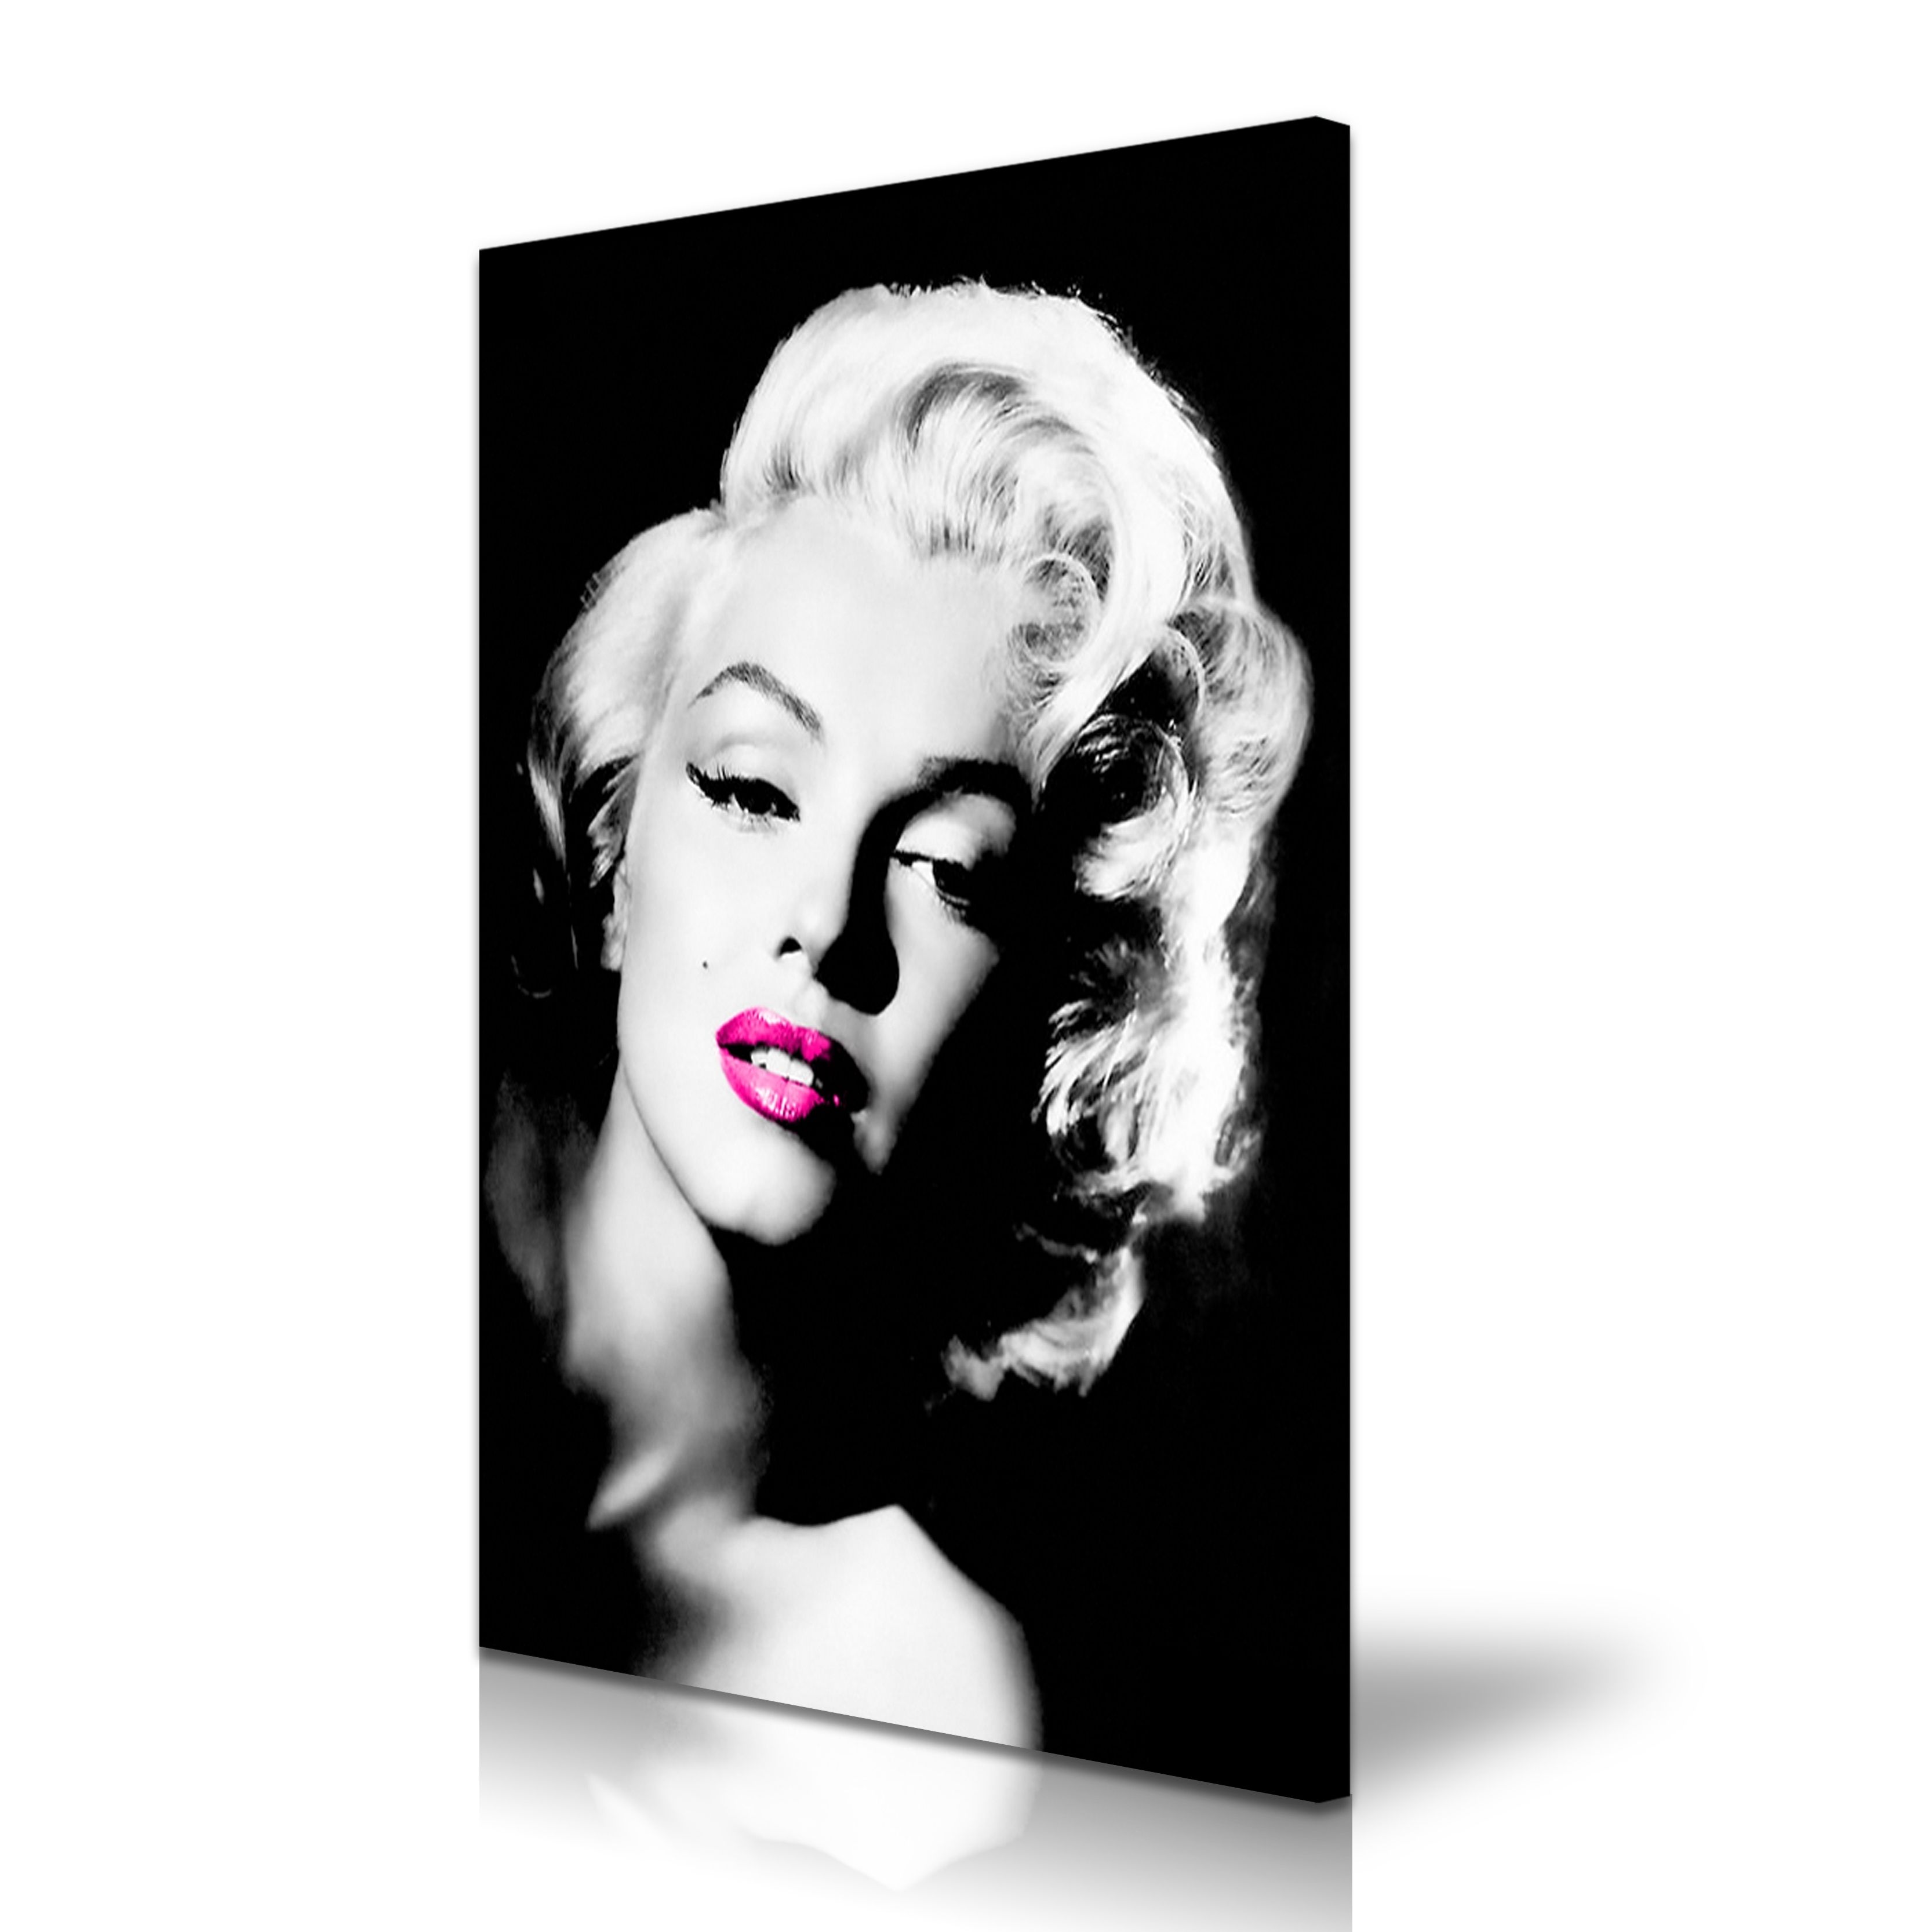 15 Black And White Marilyn Monroe Framed Pictures Selection Throughout Current Marilyn Monroe Framed Wall Art (View 5 of 15)